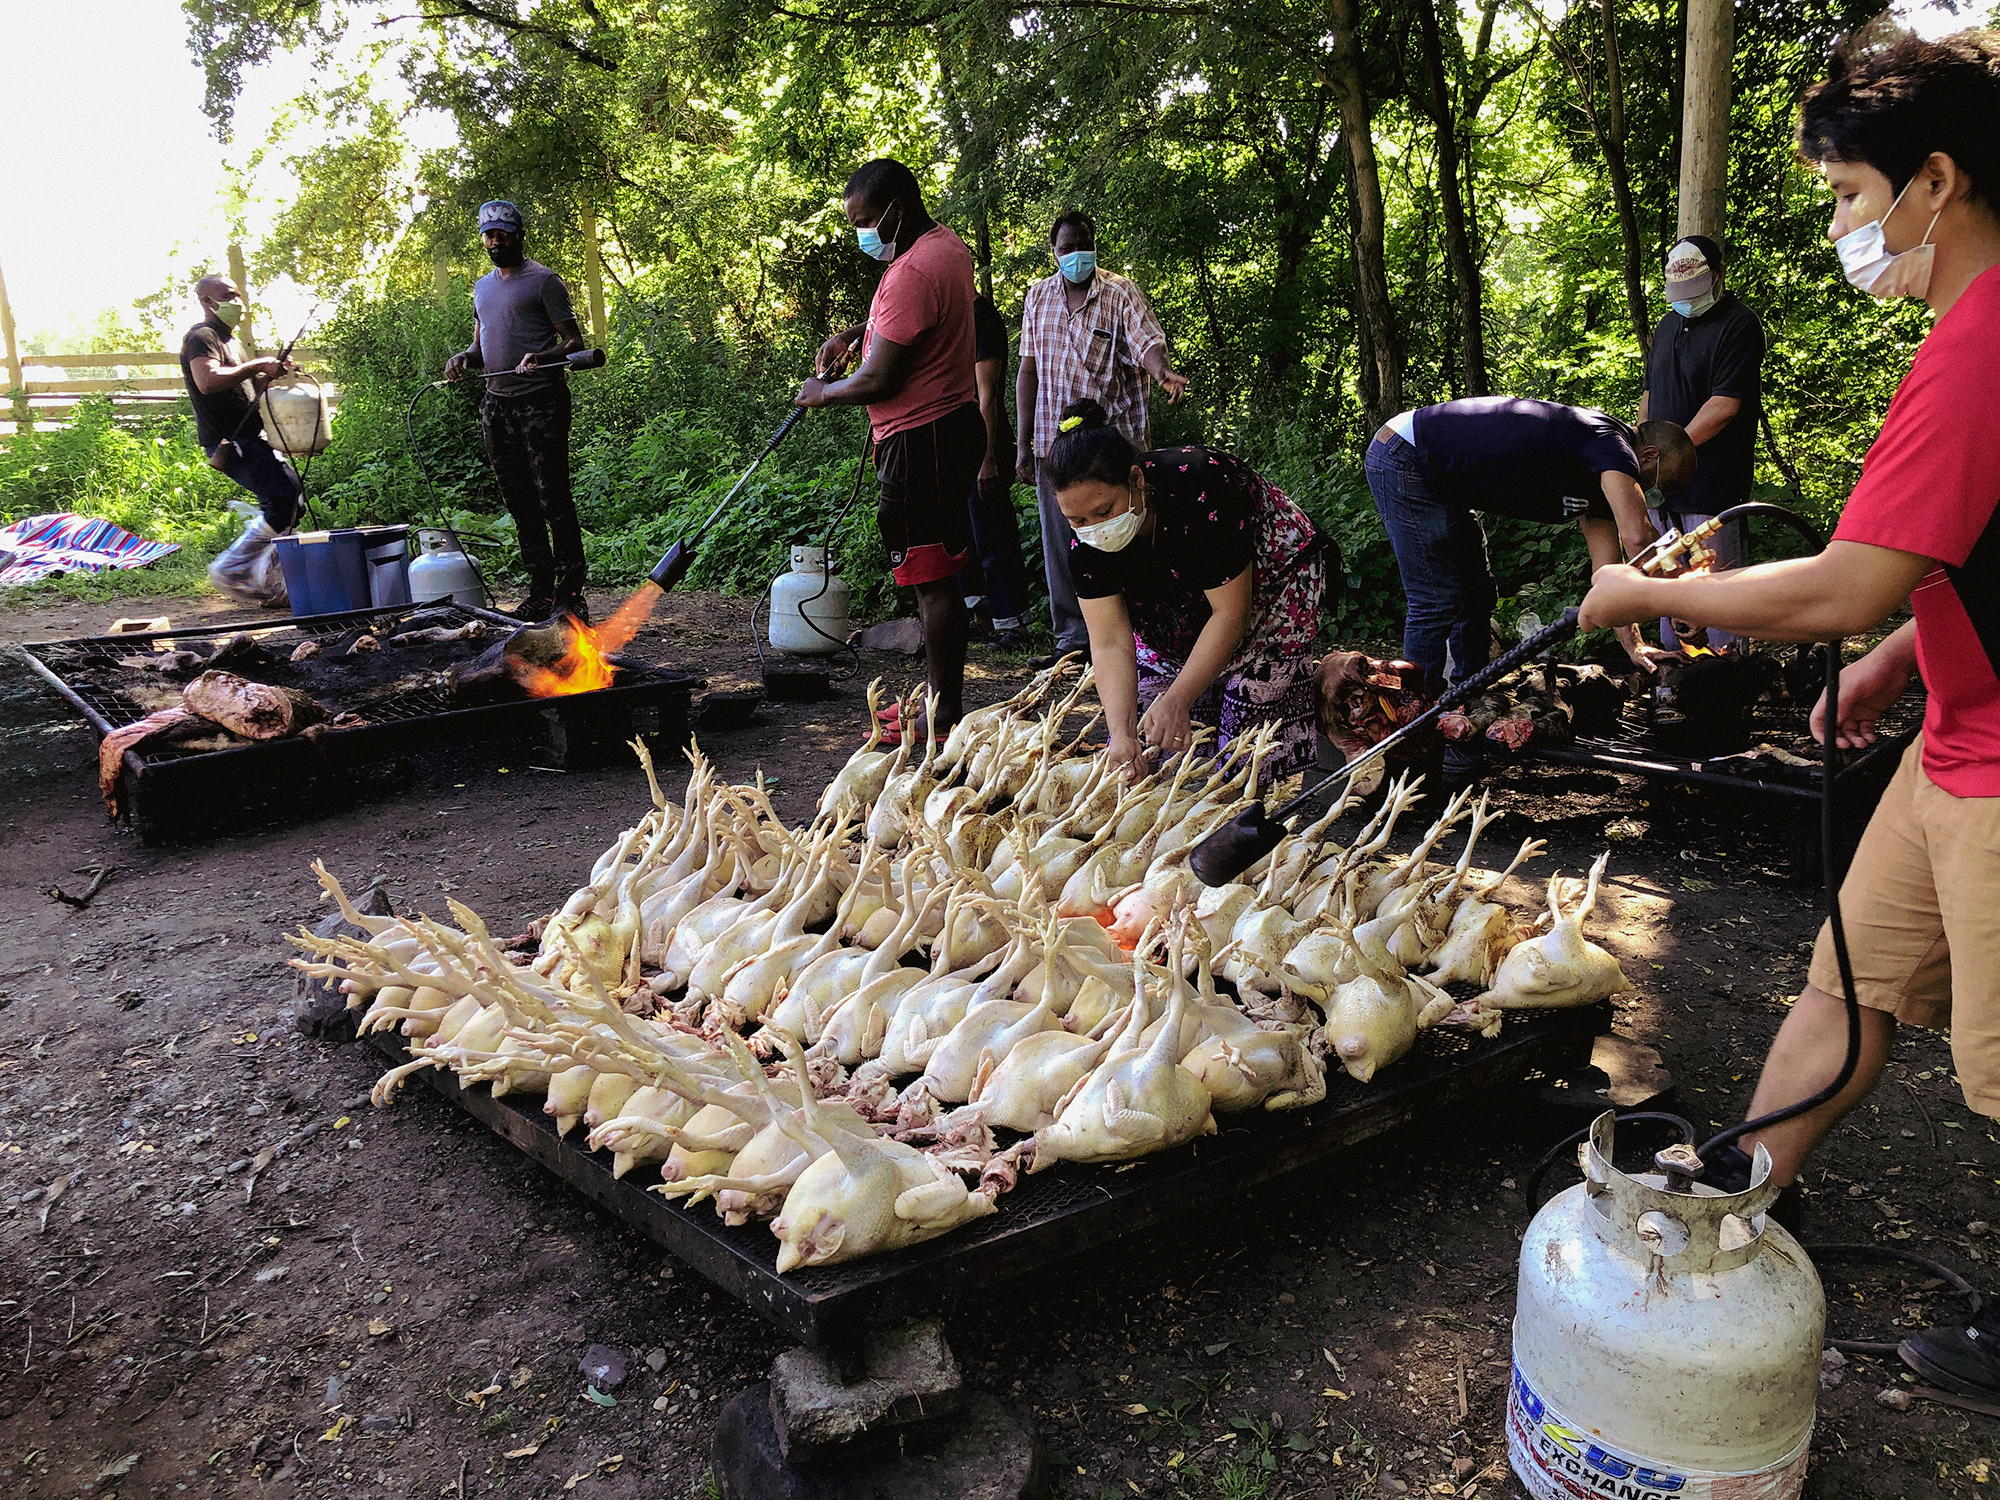 Dead, featherless chickens lying side by side being roasted by people with handheld torches